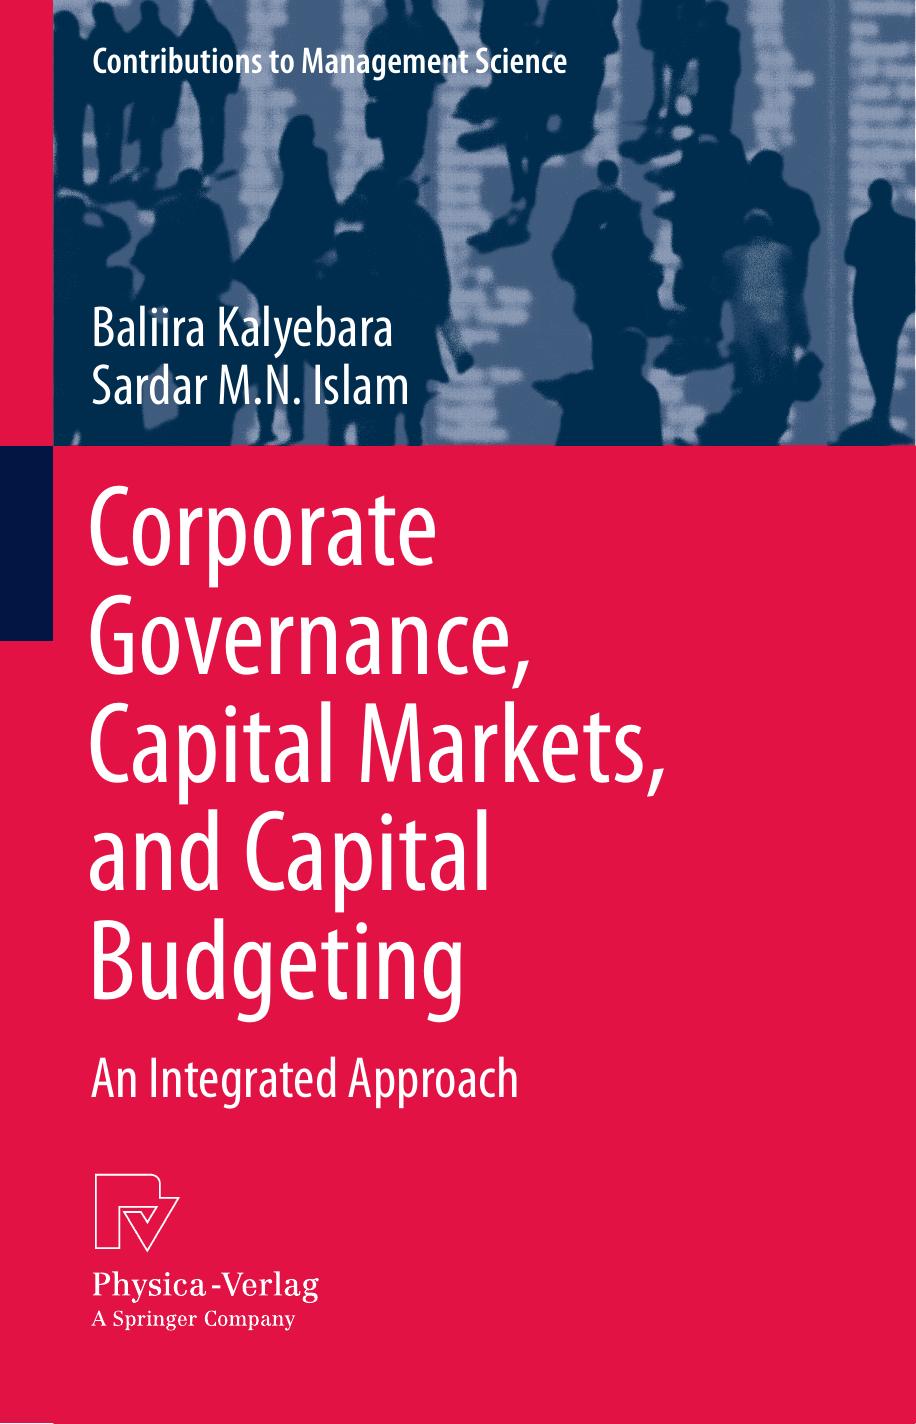 Corporate governance capital markets and capital budgeting an integrated approach.jpg